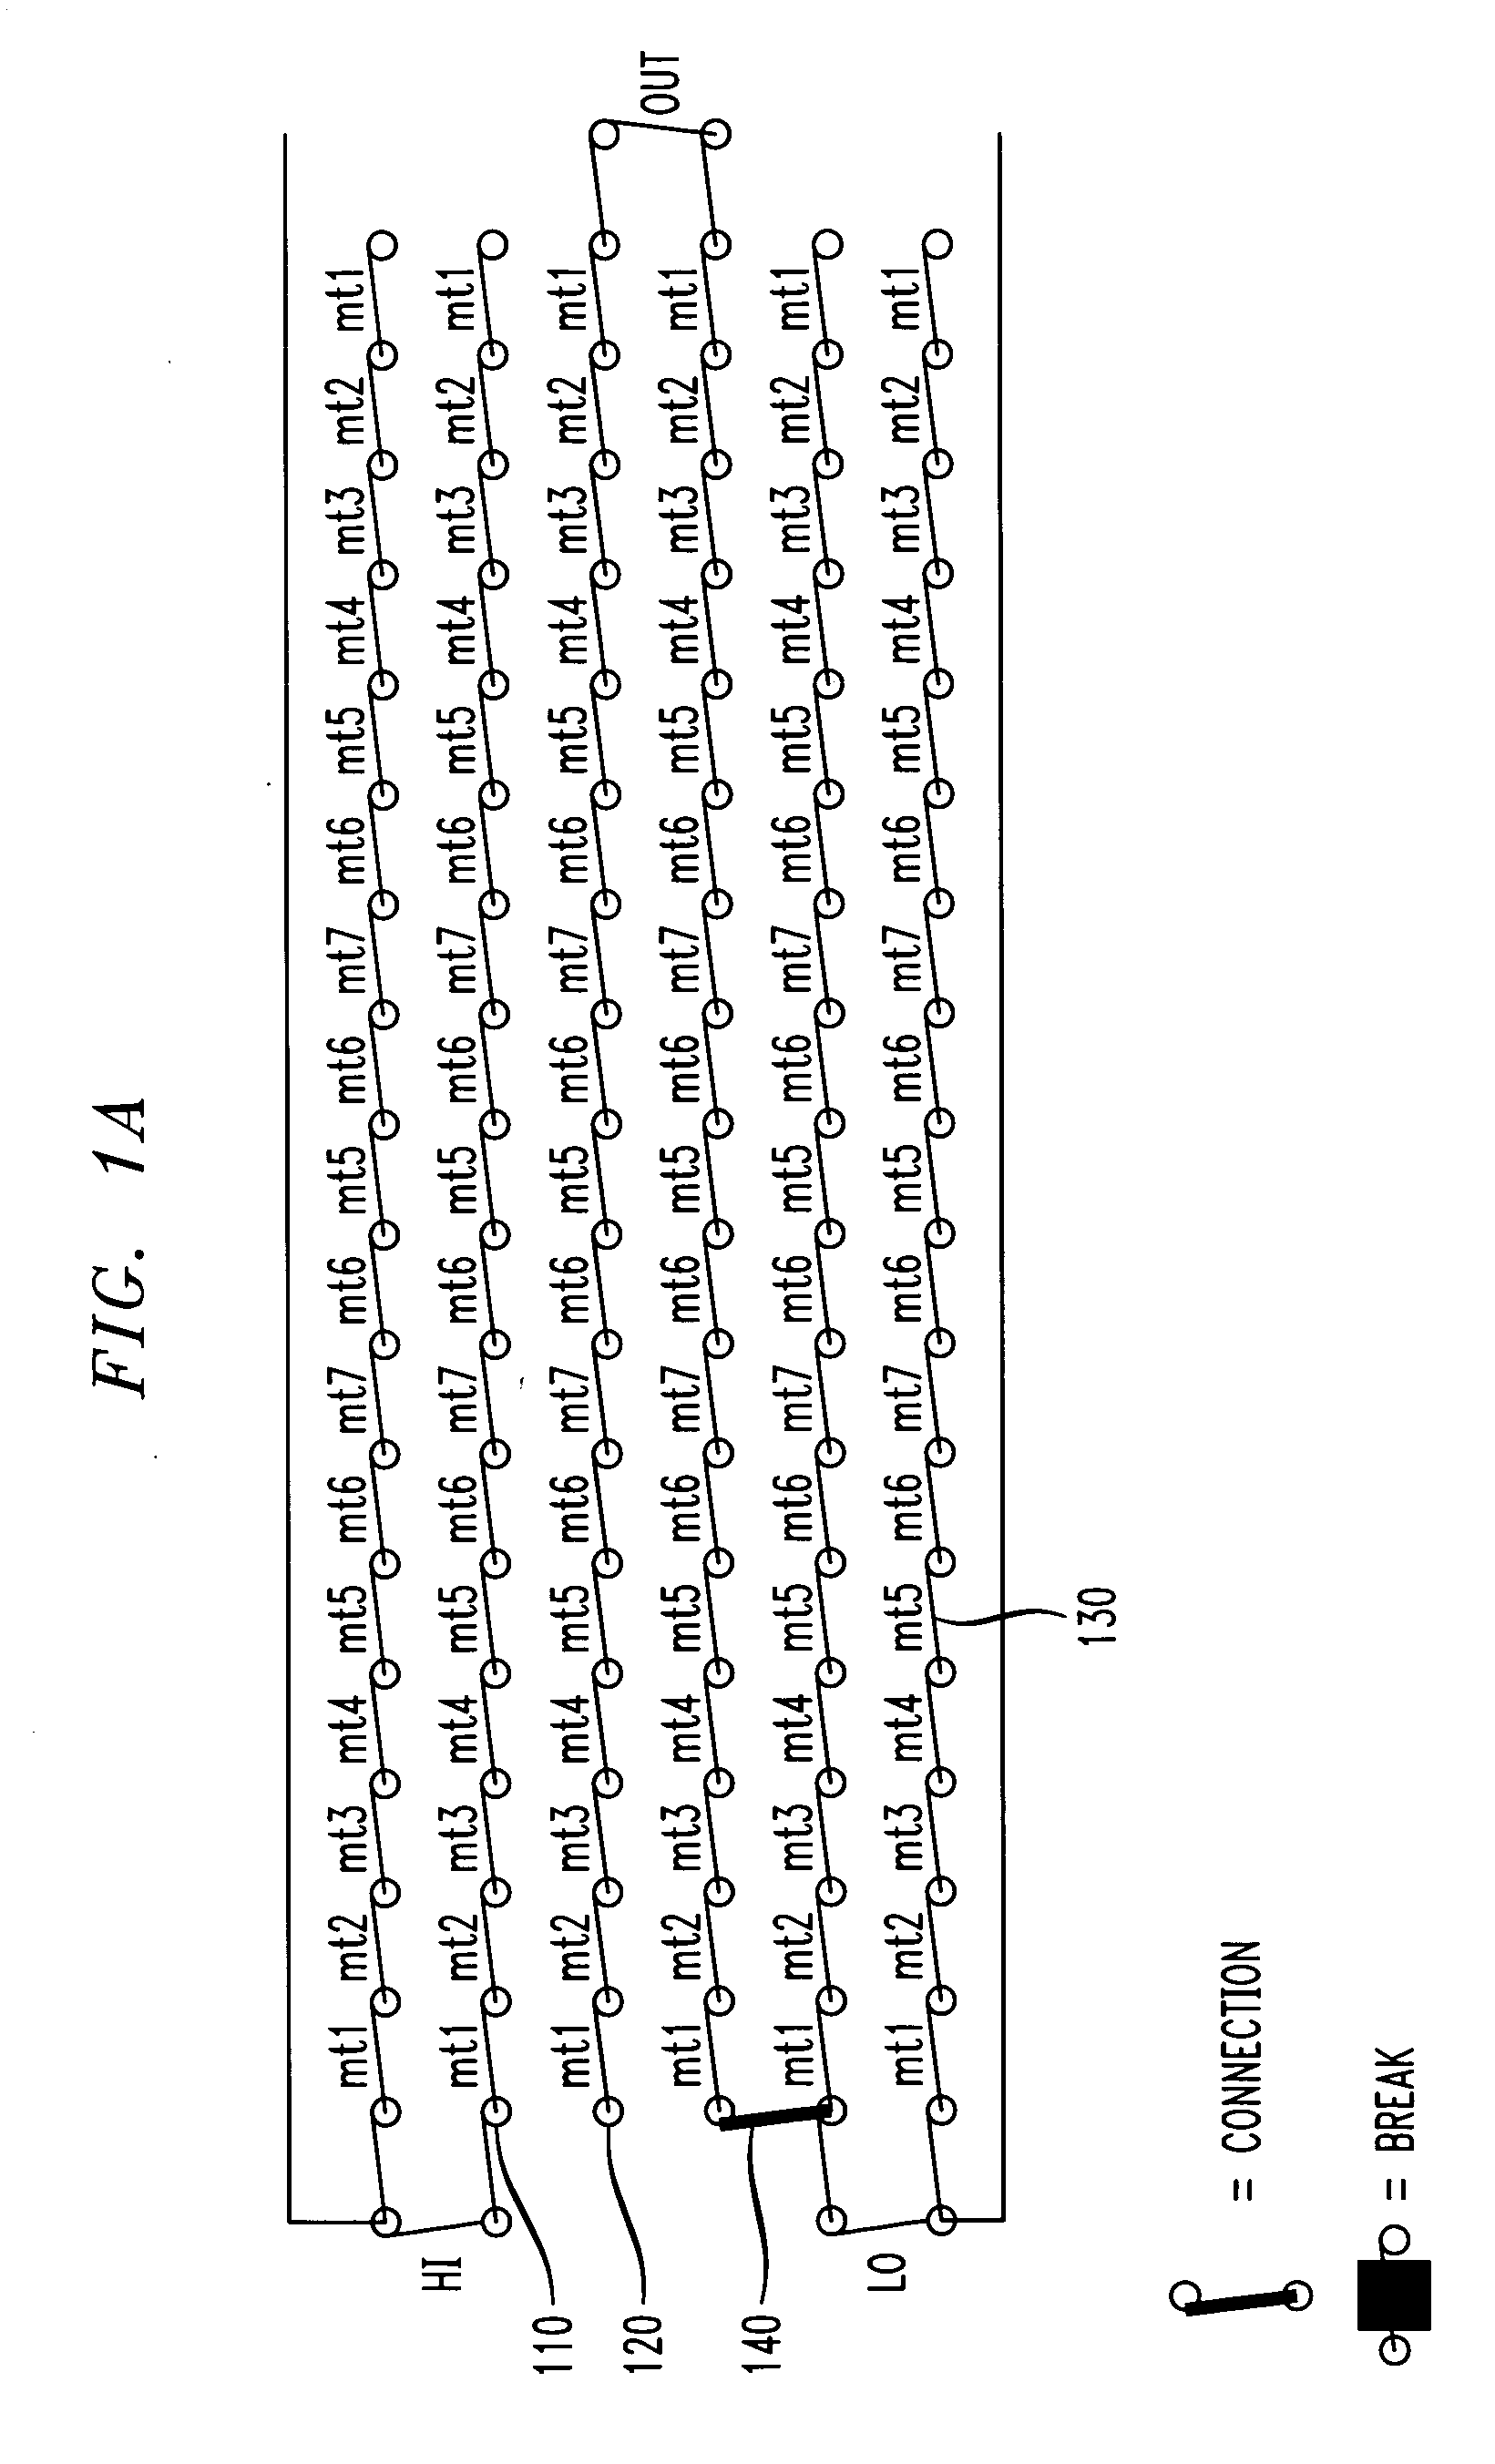 Techniques for facilitating identification updates in an integrated circuit